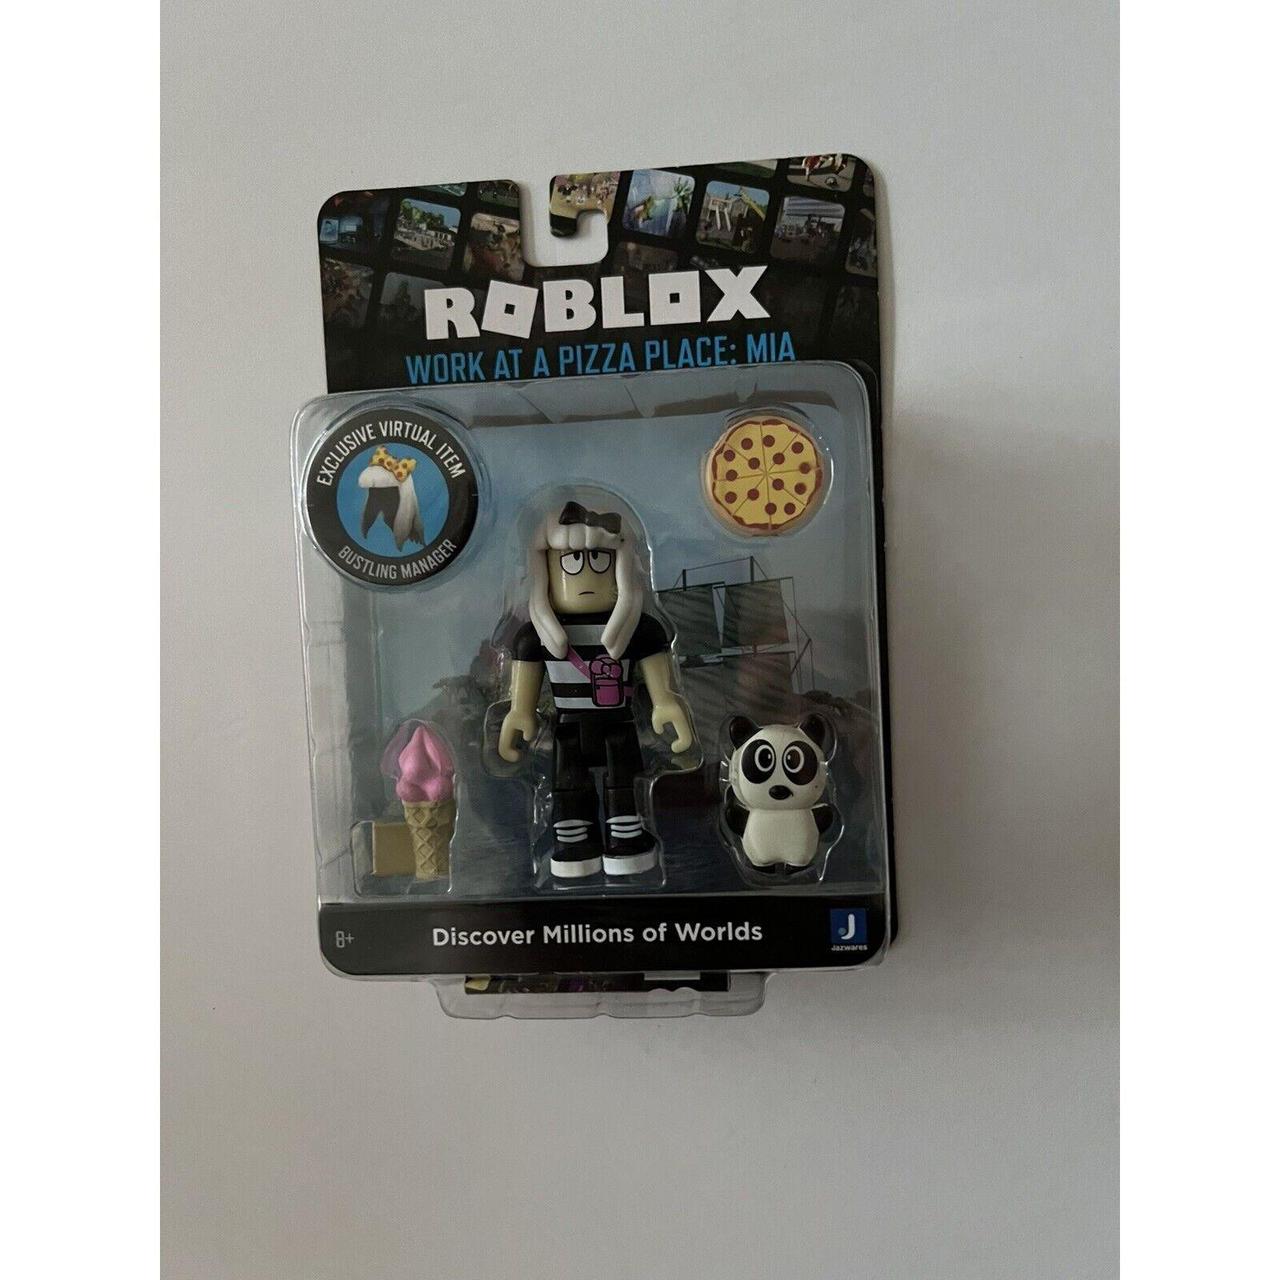 Roblox - Funky Friday: FUNKY CHEESE & Exclusive Virtual Item Code 2022  Brand New